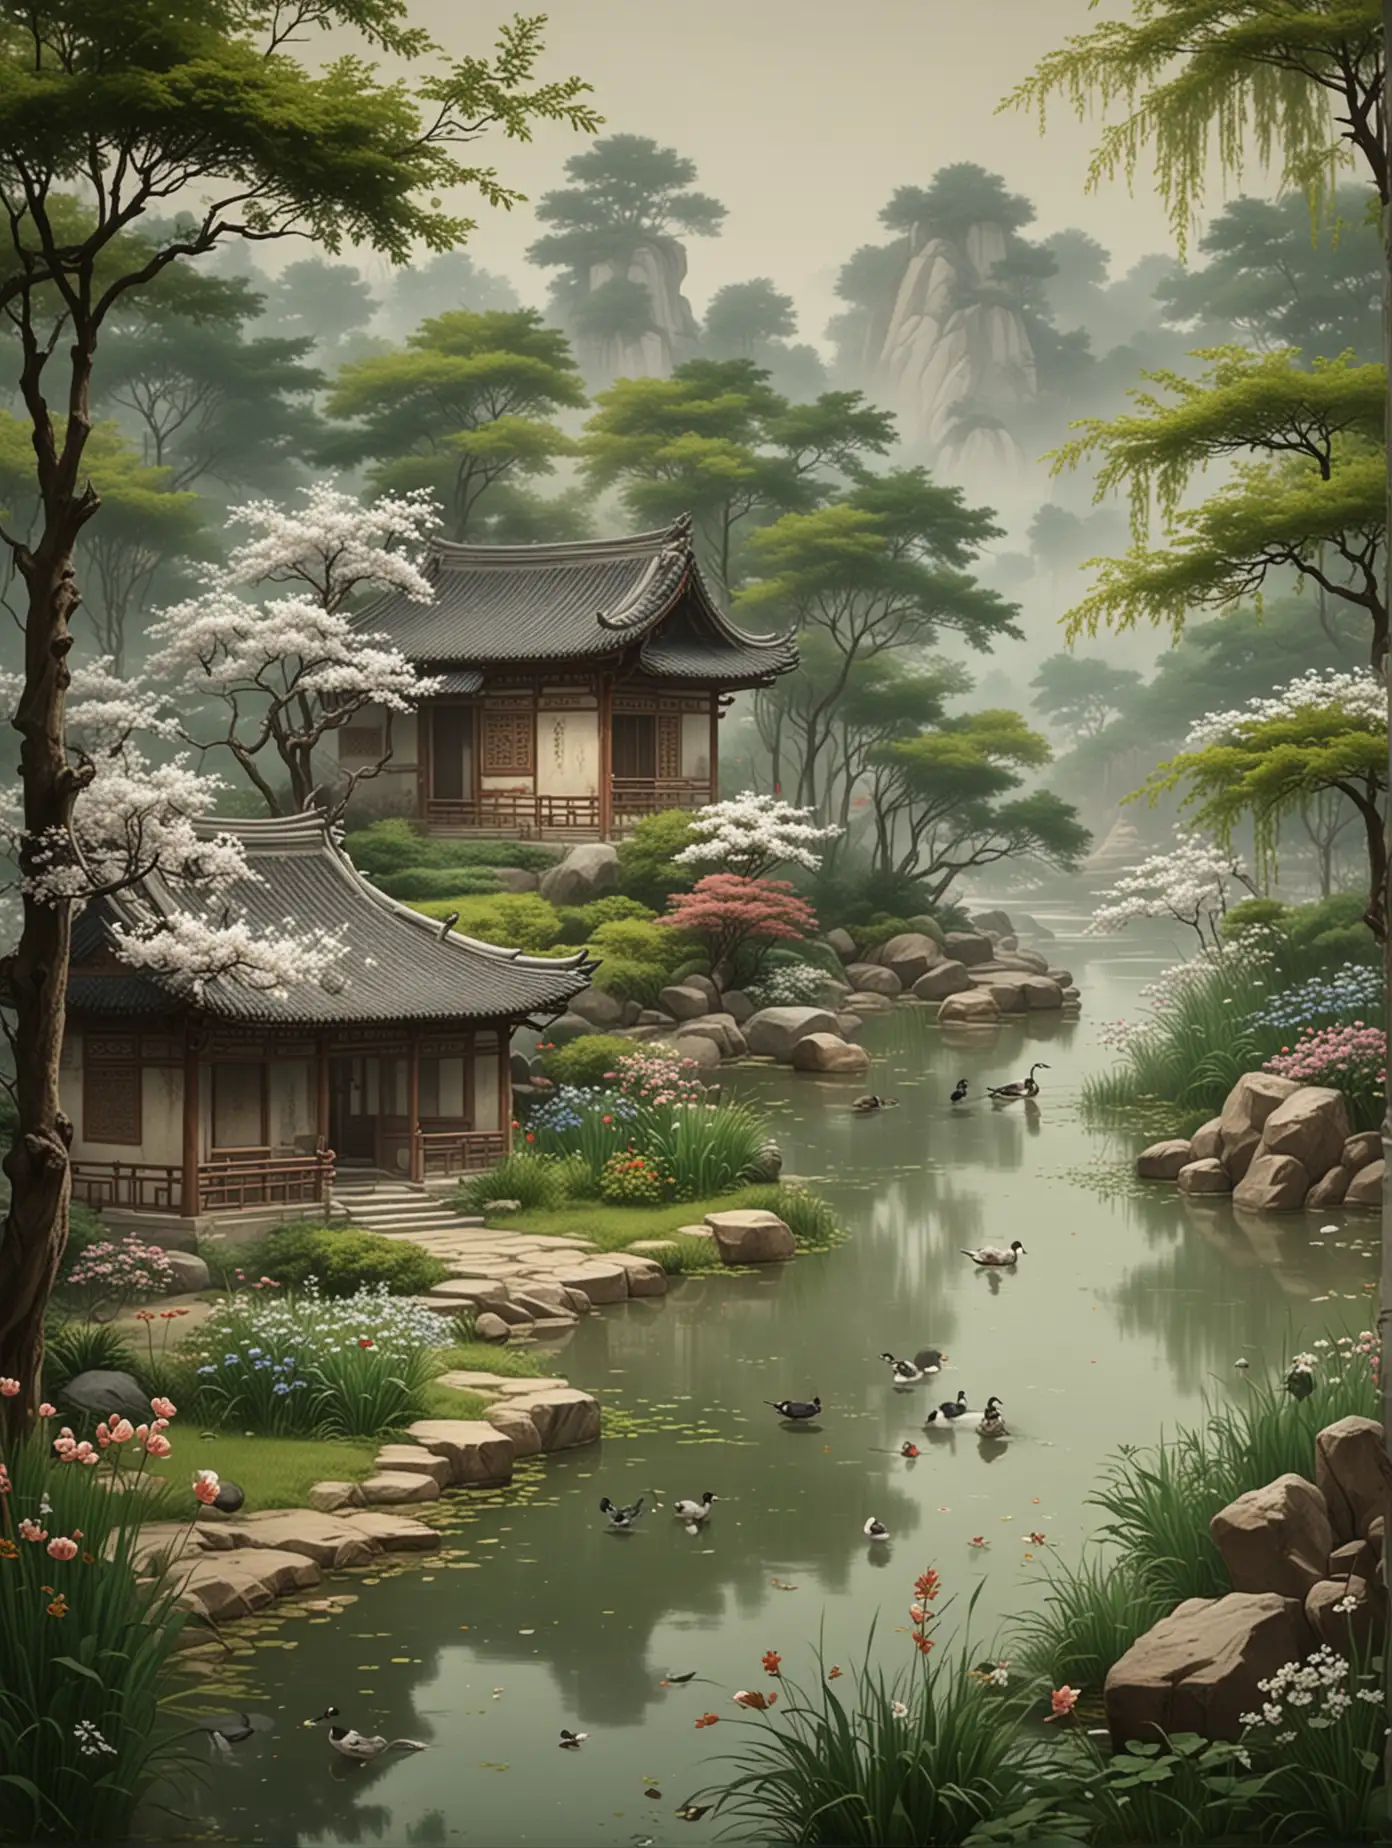 Gongbi painting, Song Dynasty, cottage, waterfall, trees, small pond, ducks, geese, flowers, spring, grass, detailed details, 8k high definition